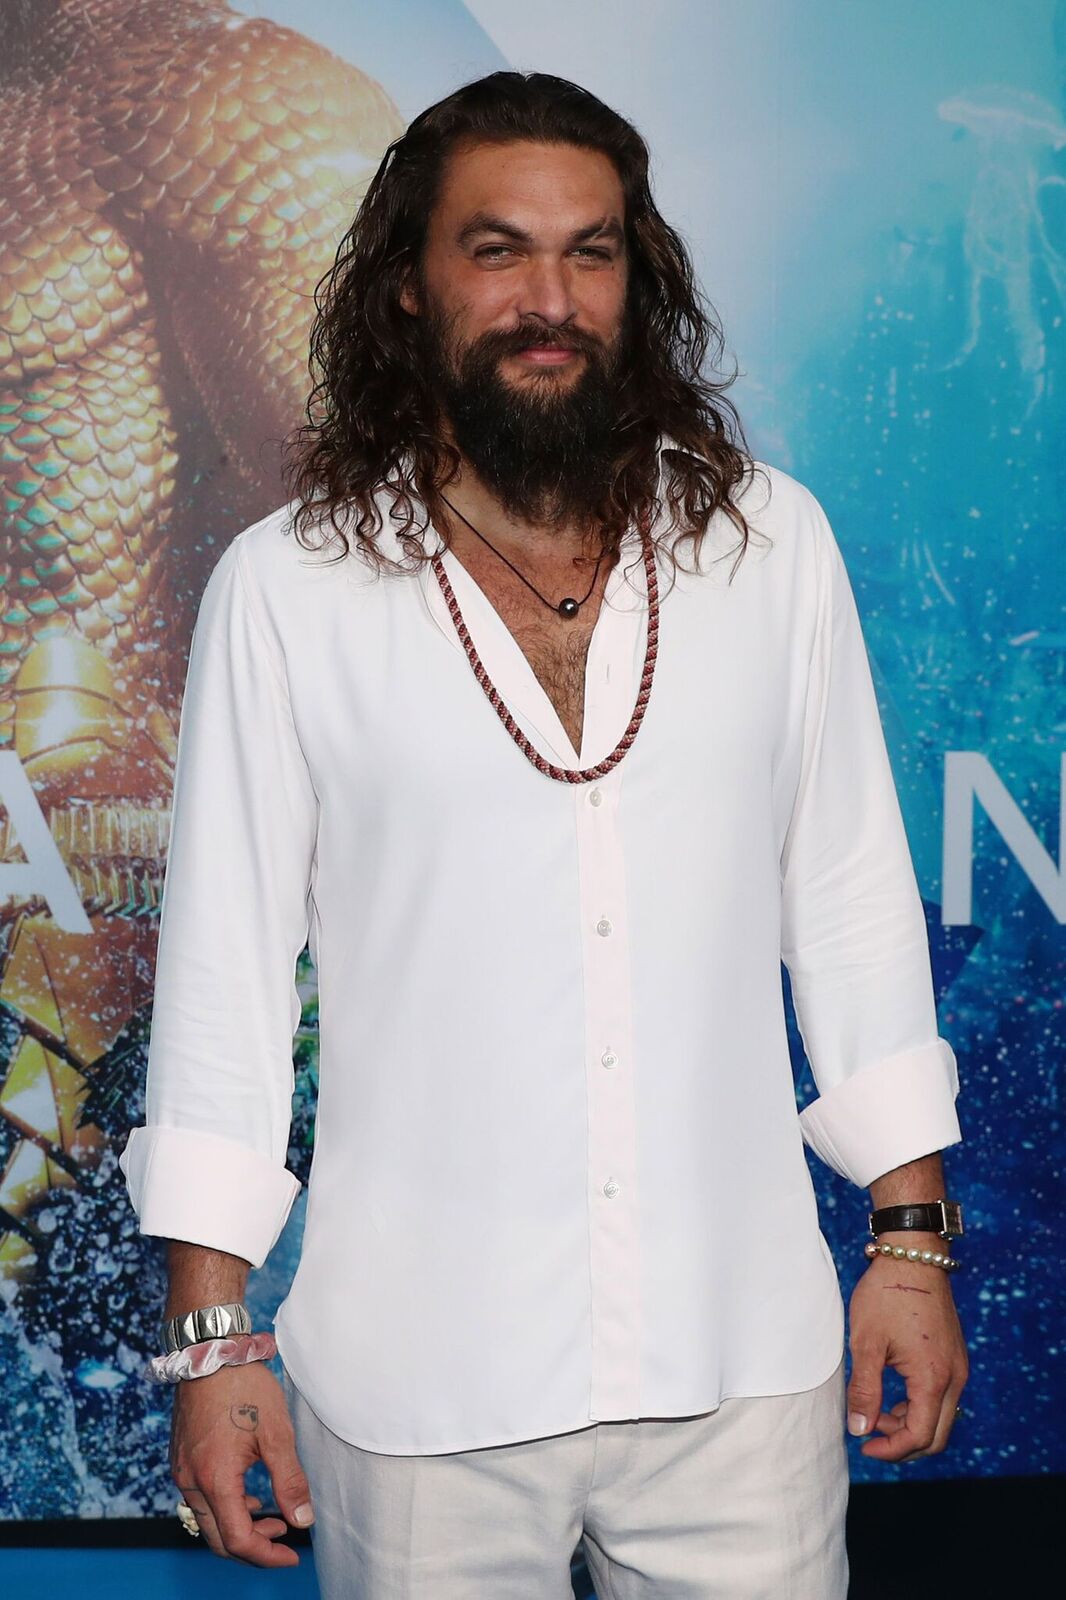 Jason Momoa poses at the Australian premiere of Aquaman on December 18, 2018 in Gold Coast, Australia. | Photo: Getty Images